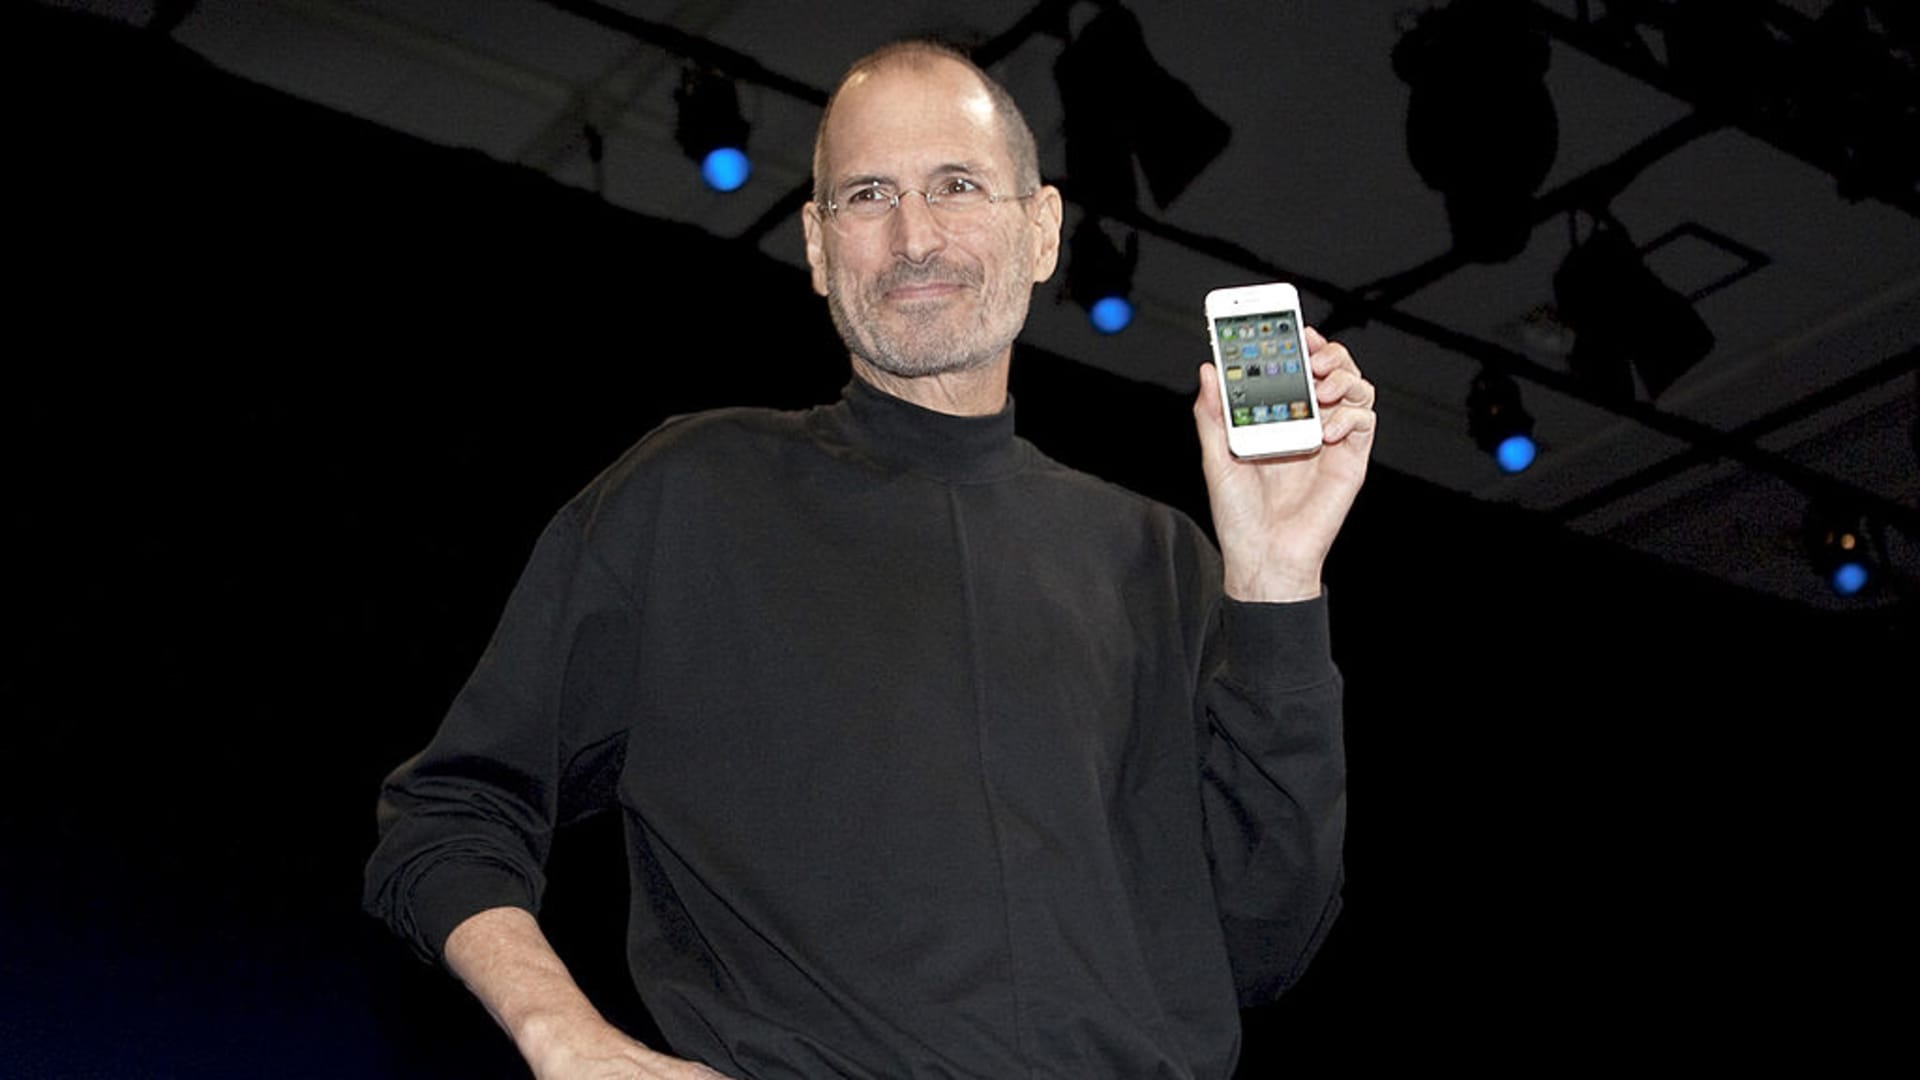 Steve Jobs, chief executive officer of Apple Inc., unveils the iPhone 4 during his keynote address at the Apple Worldwide Developers Conference (WWDC) in San Francisco, California, U.S.